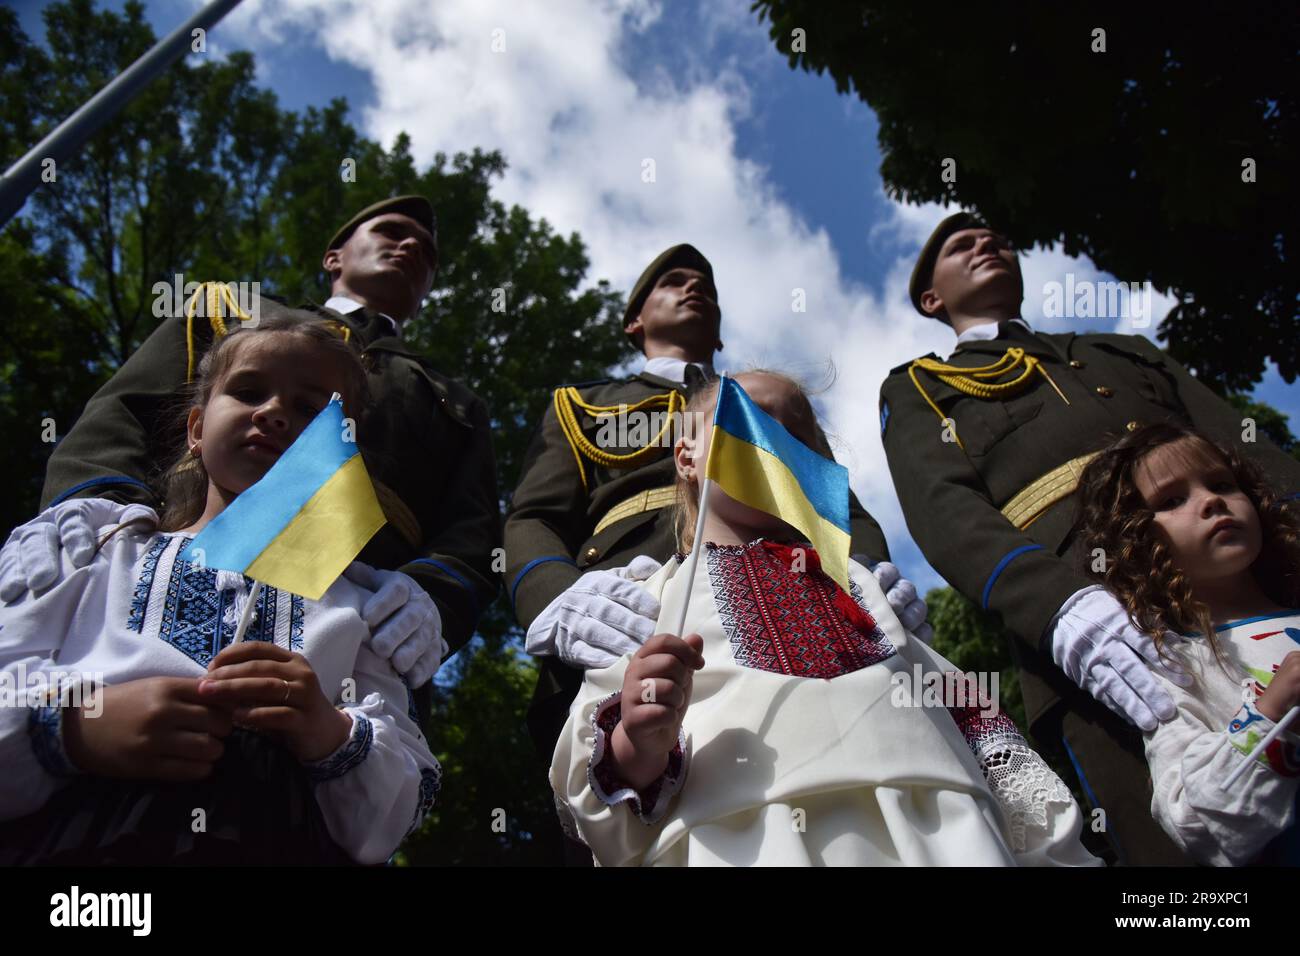 Children with Ukrainian flags during the celebration of the Constitution Day of Ukraine. Ukraine celebrated the 27th anniversary of the adoption of the country's basic law - the constitution. In the conditions of the Russian-Ukrainian war, official events were very short. In Lviv, the Ukrainian flag was raised, honor guard marched, and a military band performed. (Photo by Pavlo Palamarchuk / SOPA mages/Sipa USA) Stock Photo